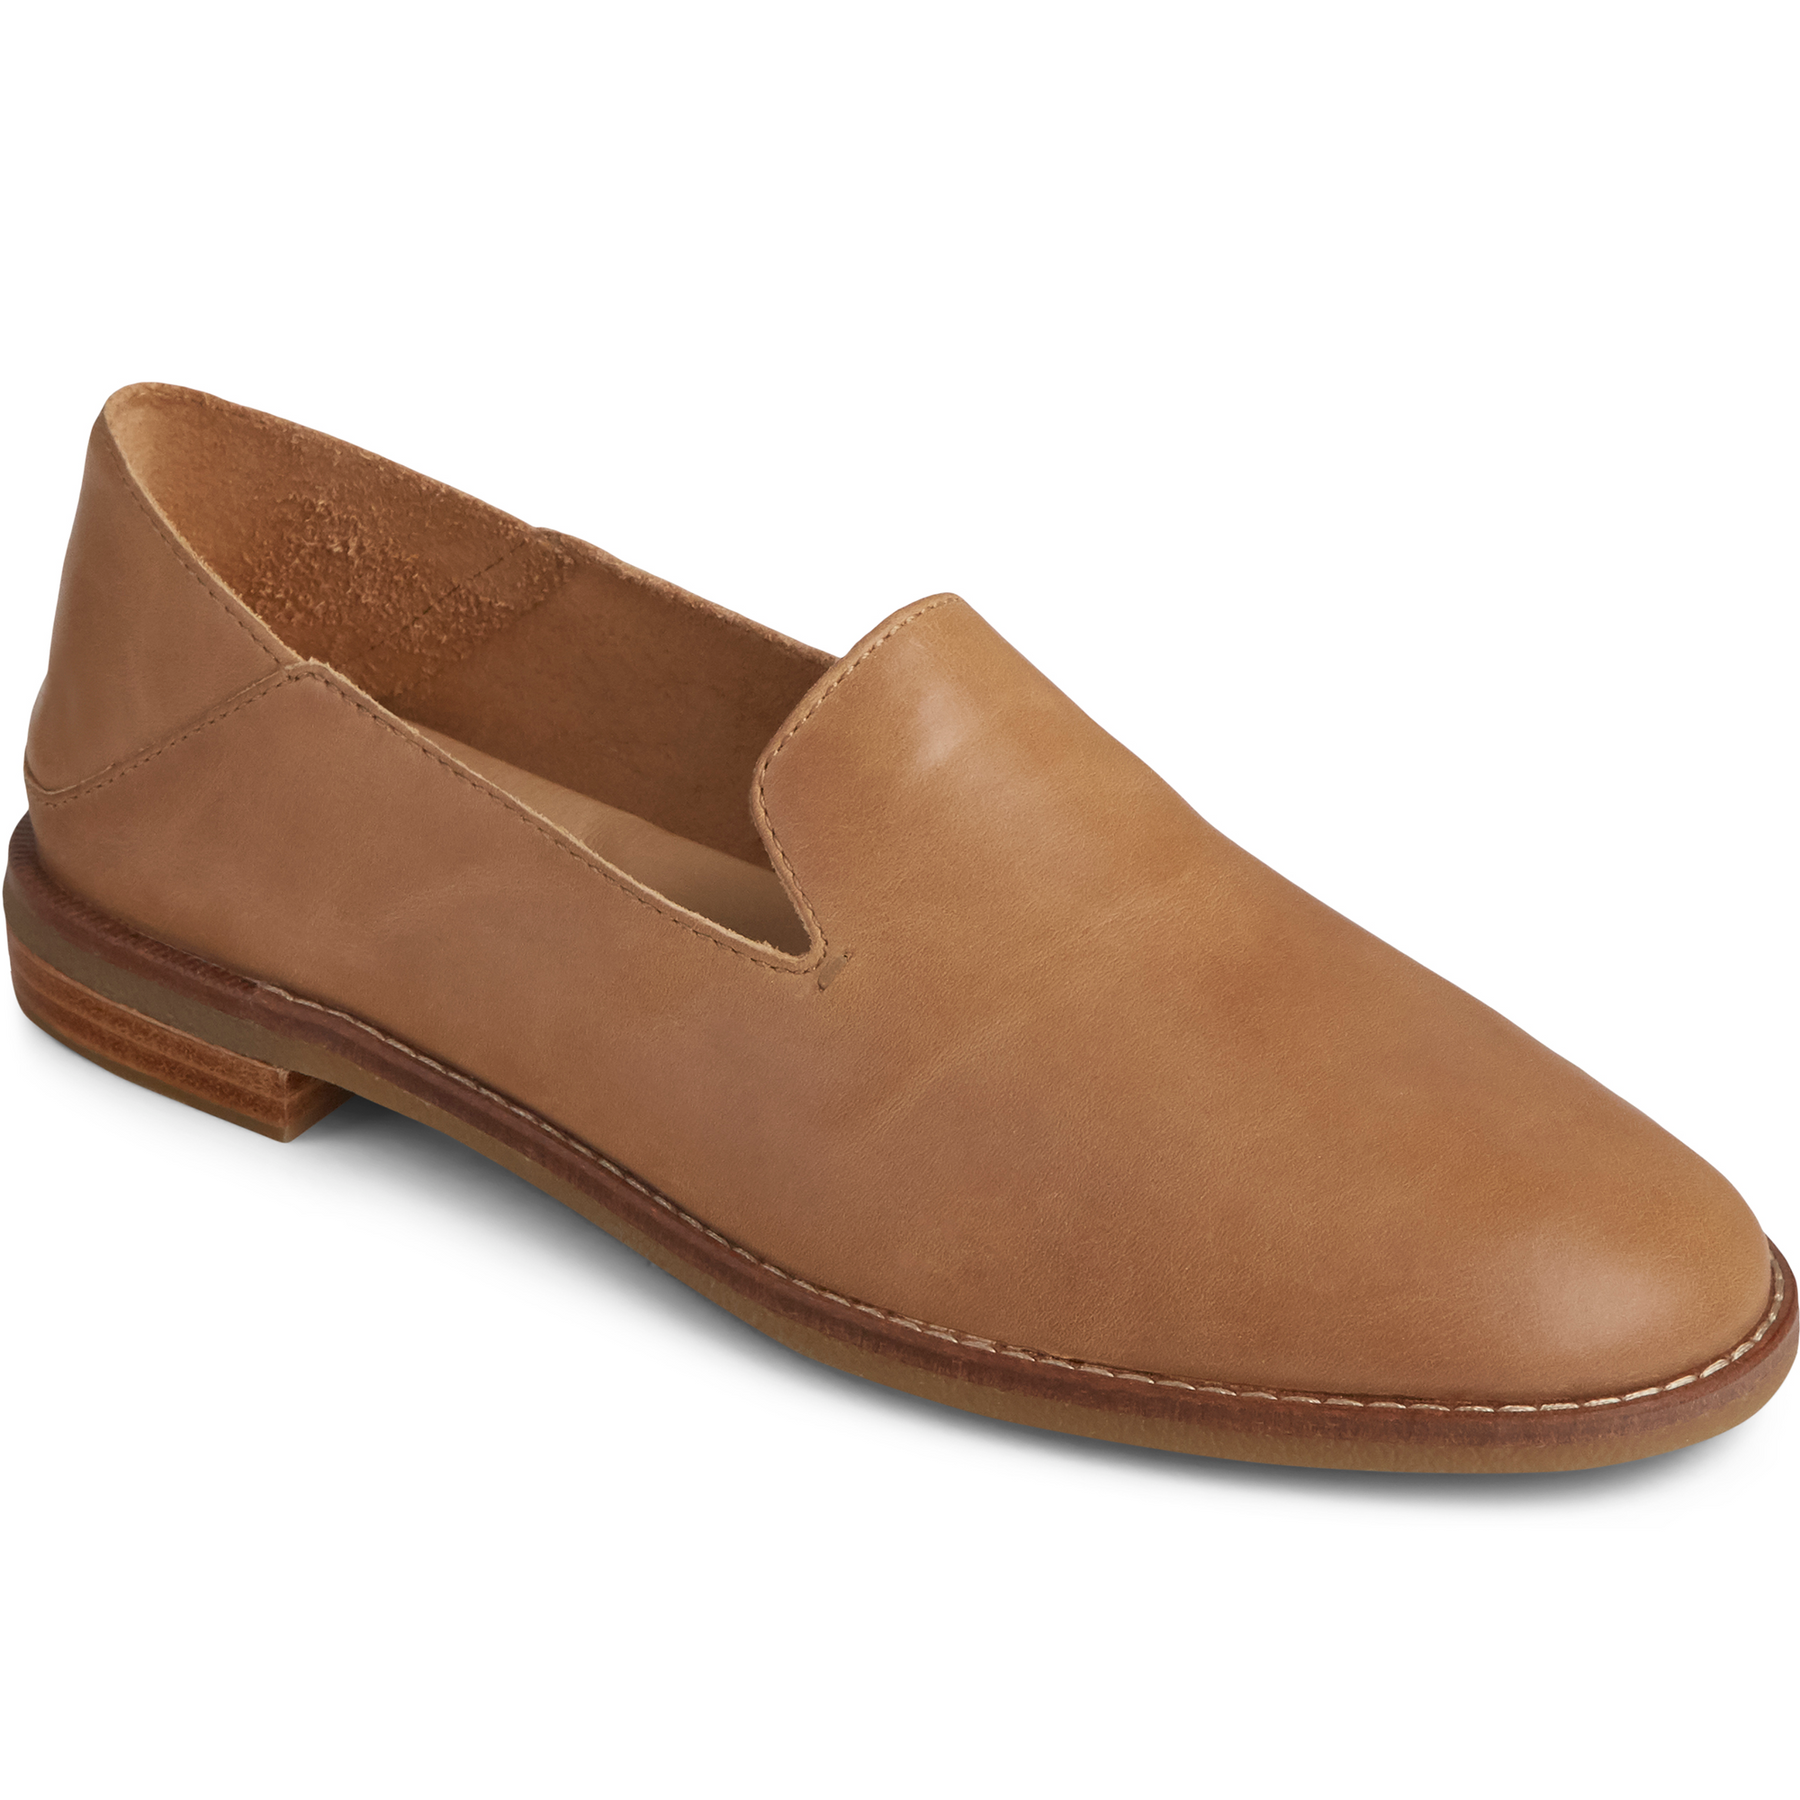 Women's Seaport Levy Tan Casual (STS82456)